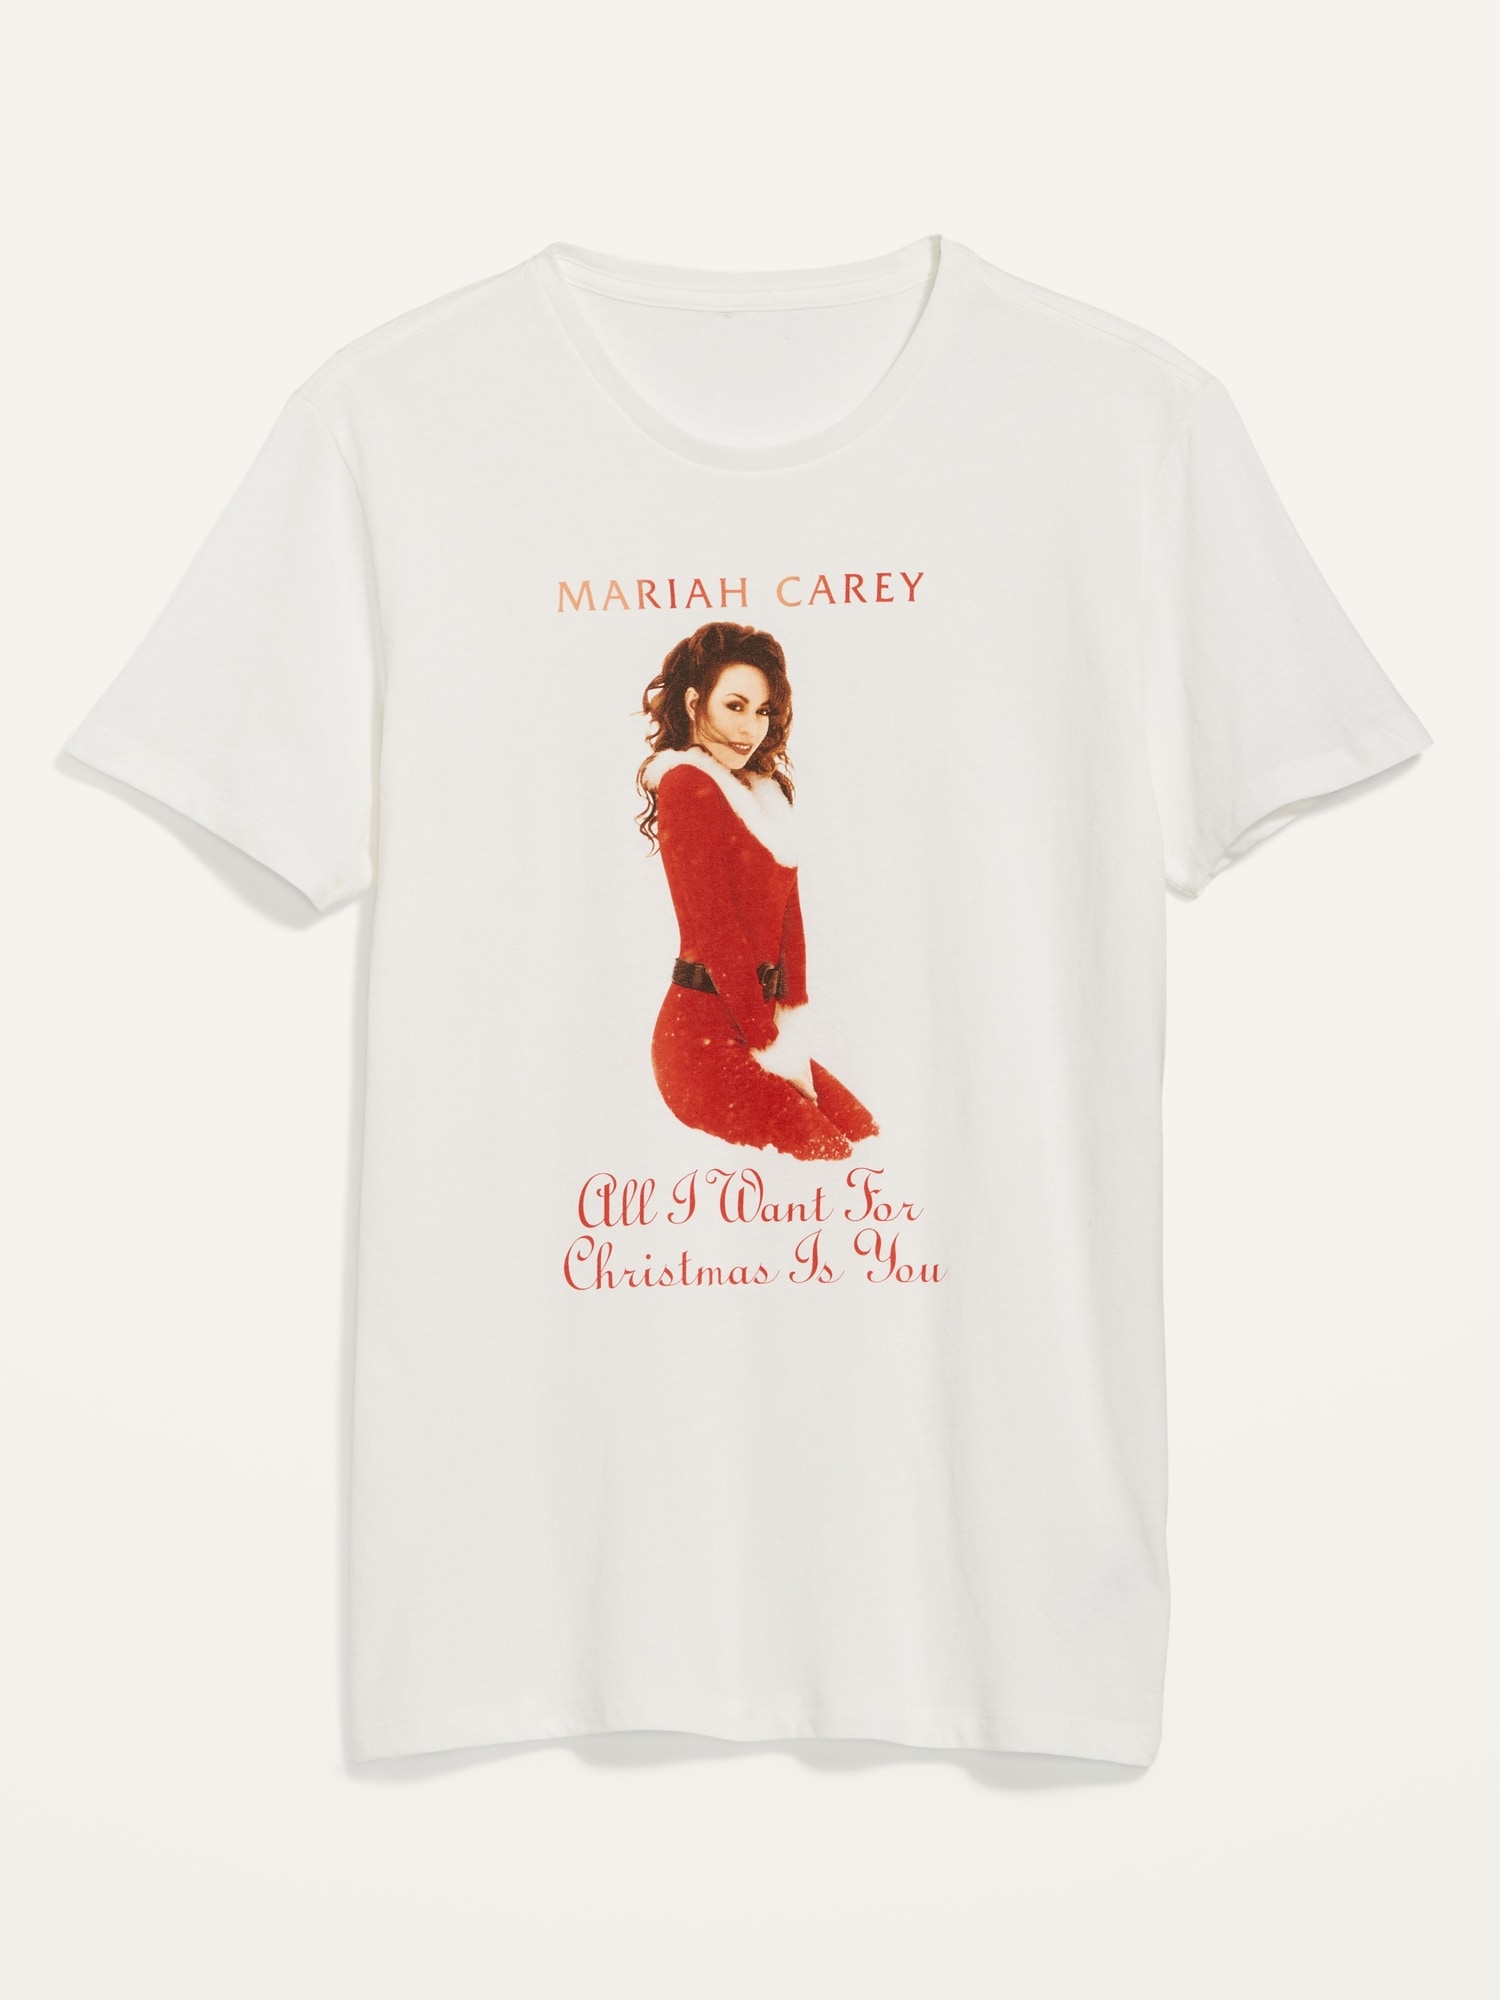 Mariah Carey™ "All I Want for Christmas Is You" Gender-Neutral T-Shirt for Adults